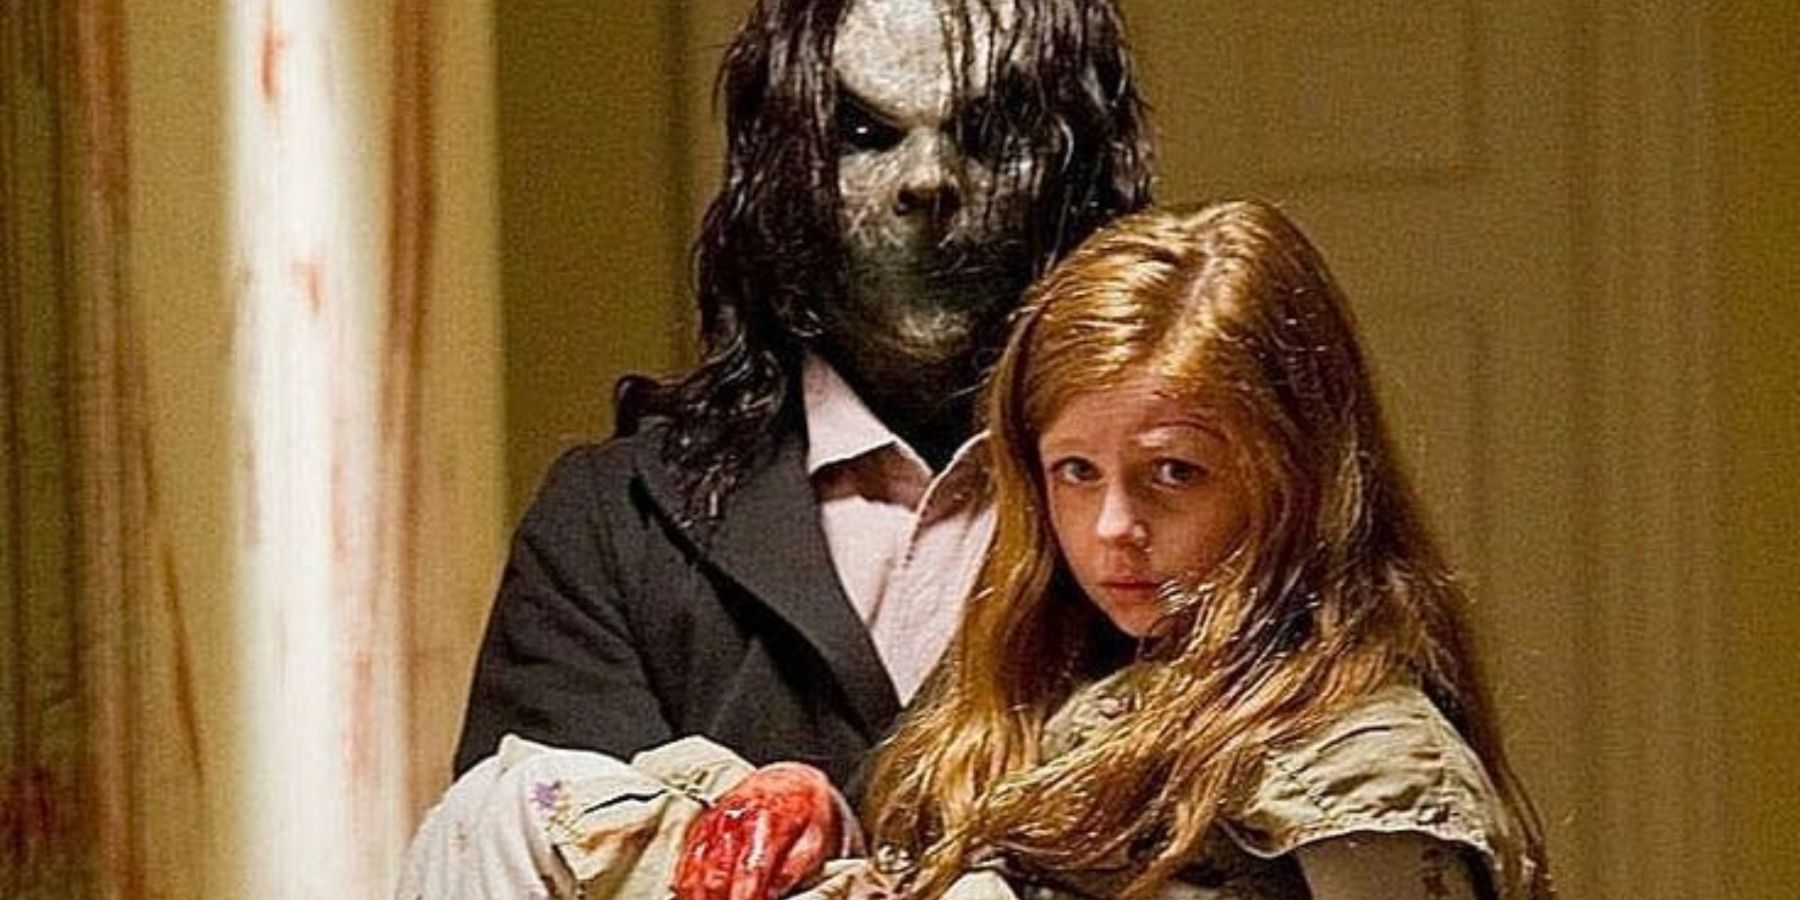 Bughuul holding Ashley (Claire Foley) in Sinister